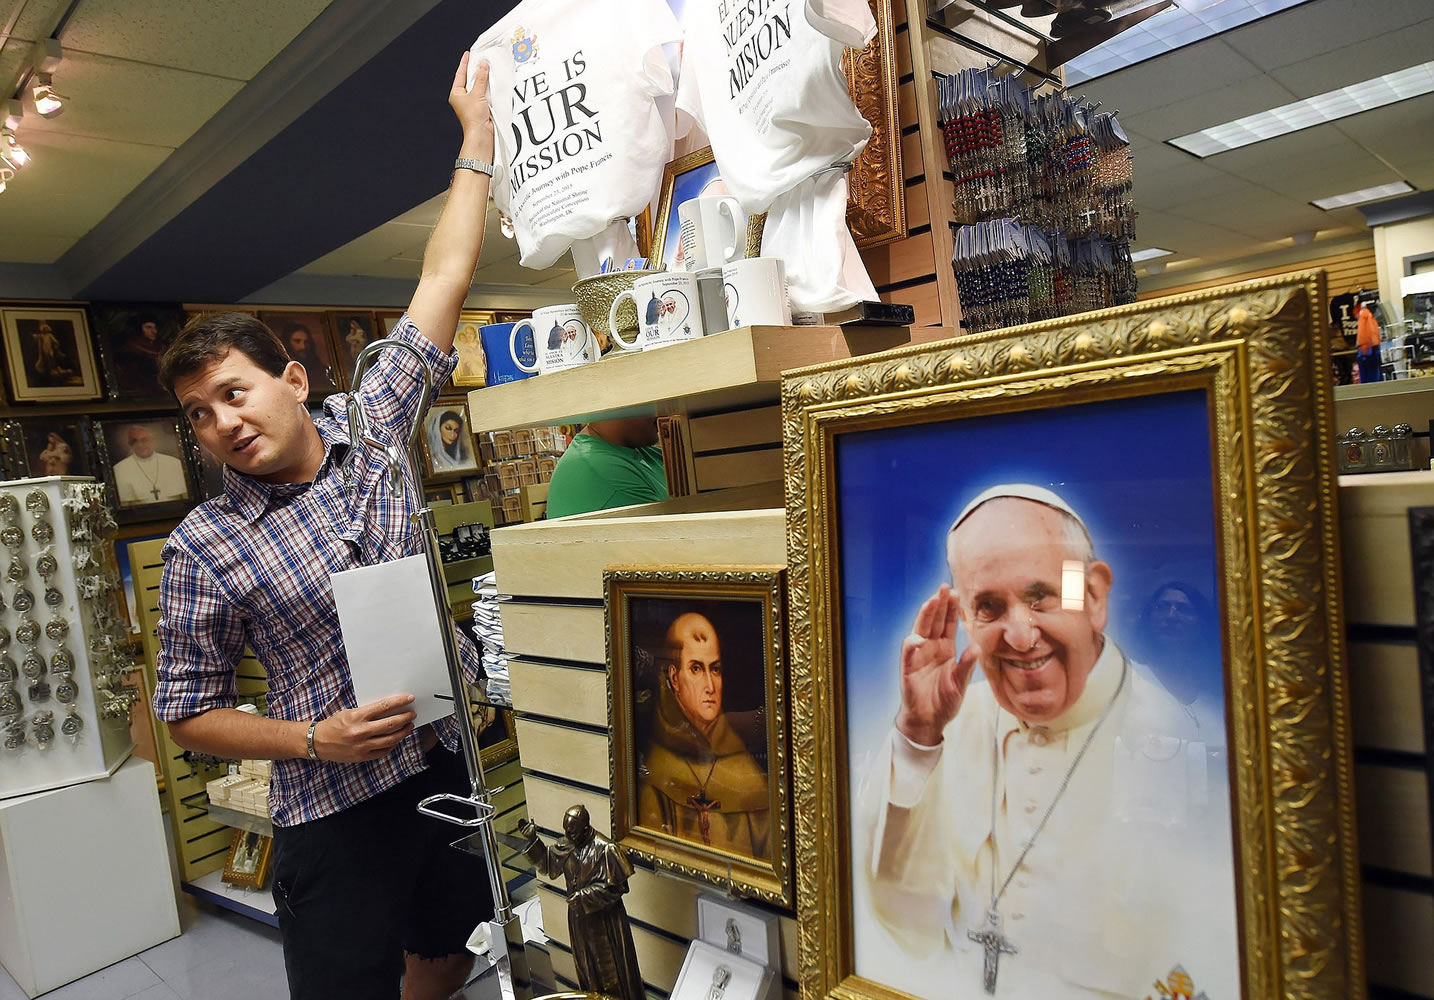 Carlos Limongi takes a shirt from a display of Pope Francis-related items at the gift shop within the Basilica of the National Shrine of the Immaculate Conception in Washington, D.C.